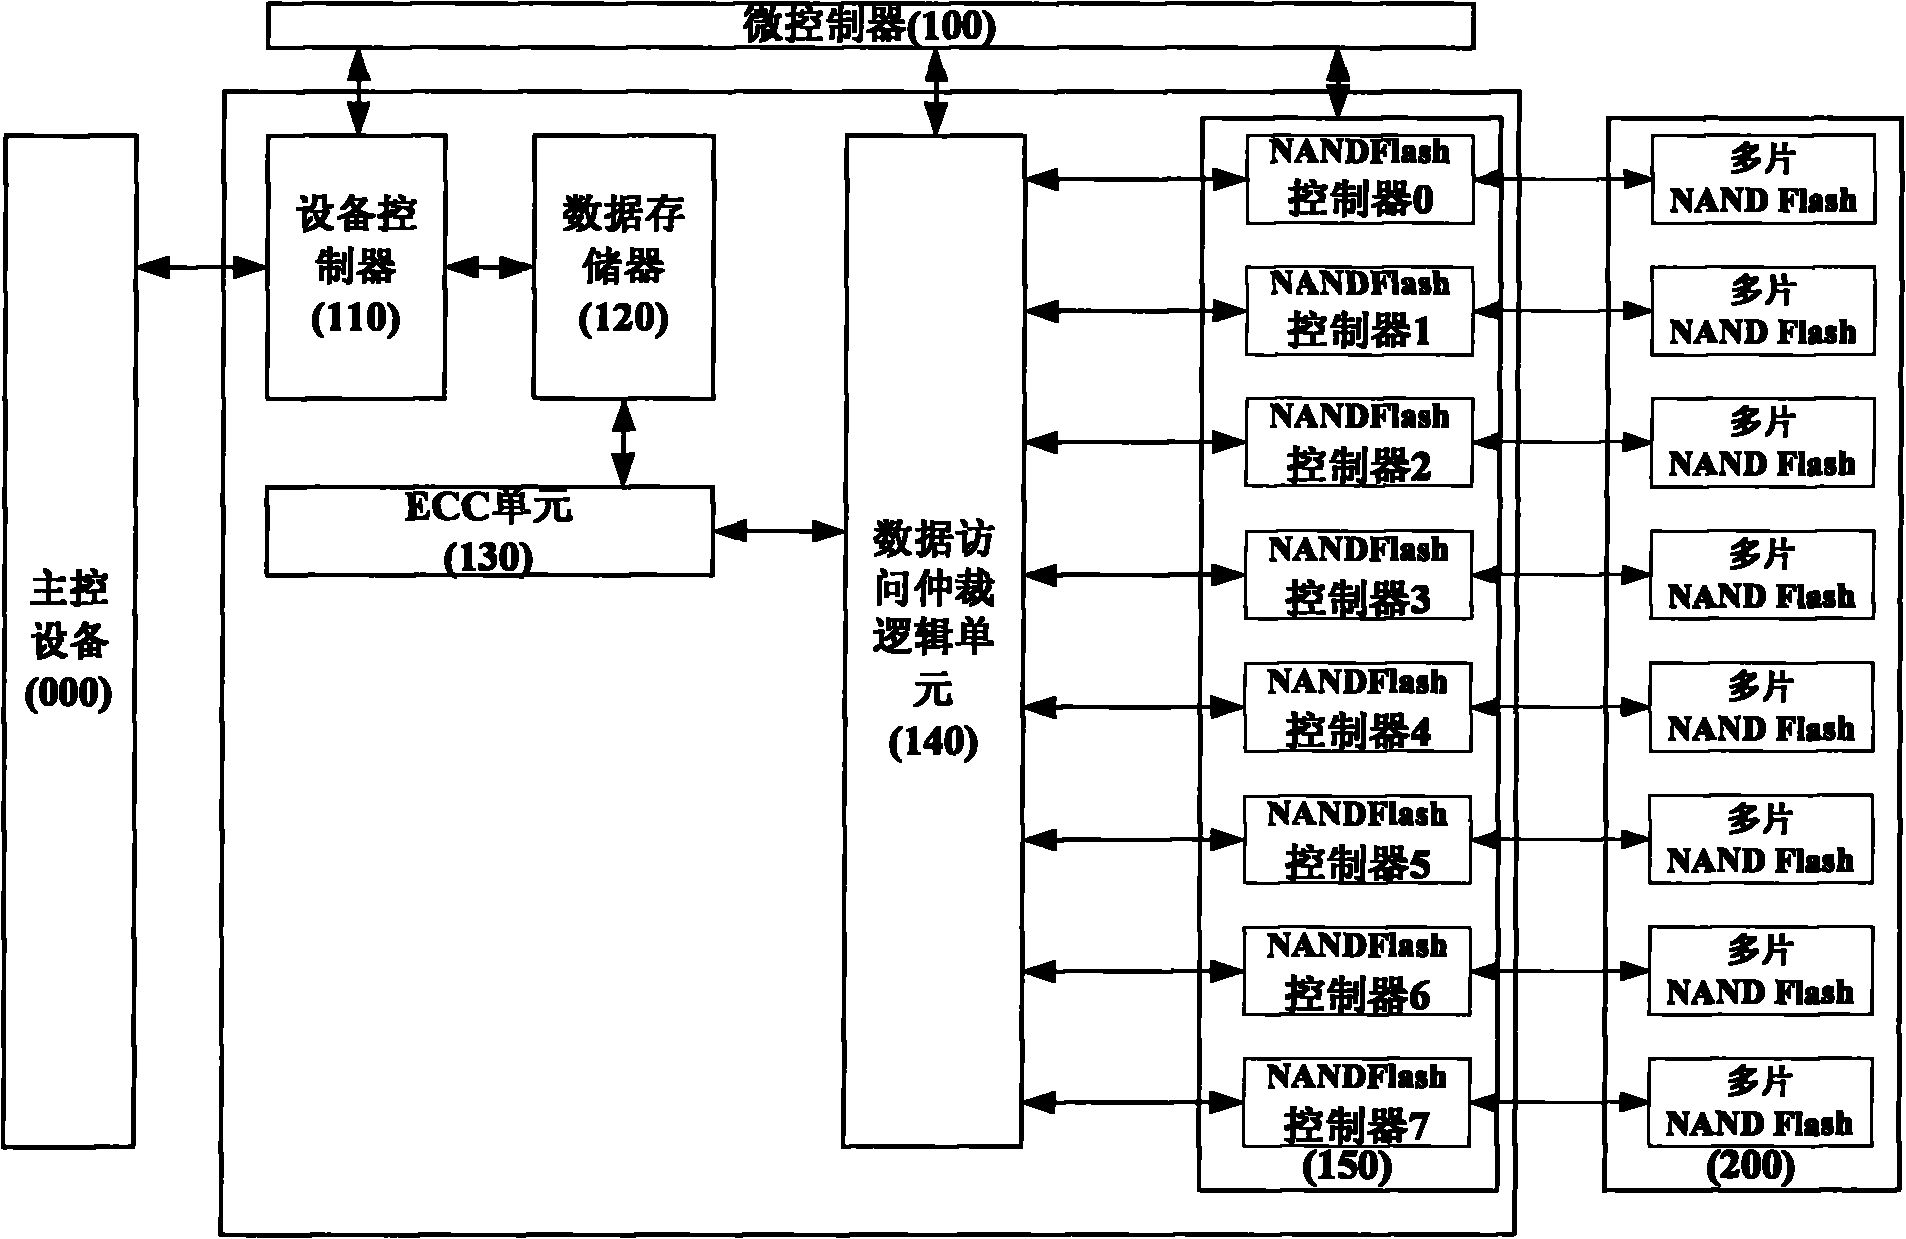 Multi-channel NANDflash controller capable of simultaneously carrying out data transmission and FTL (Flash Transition Layer) management